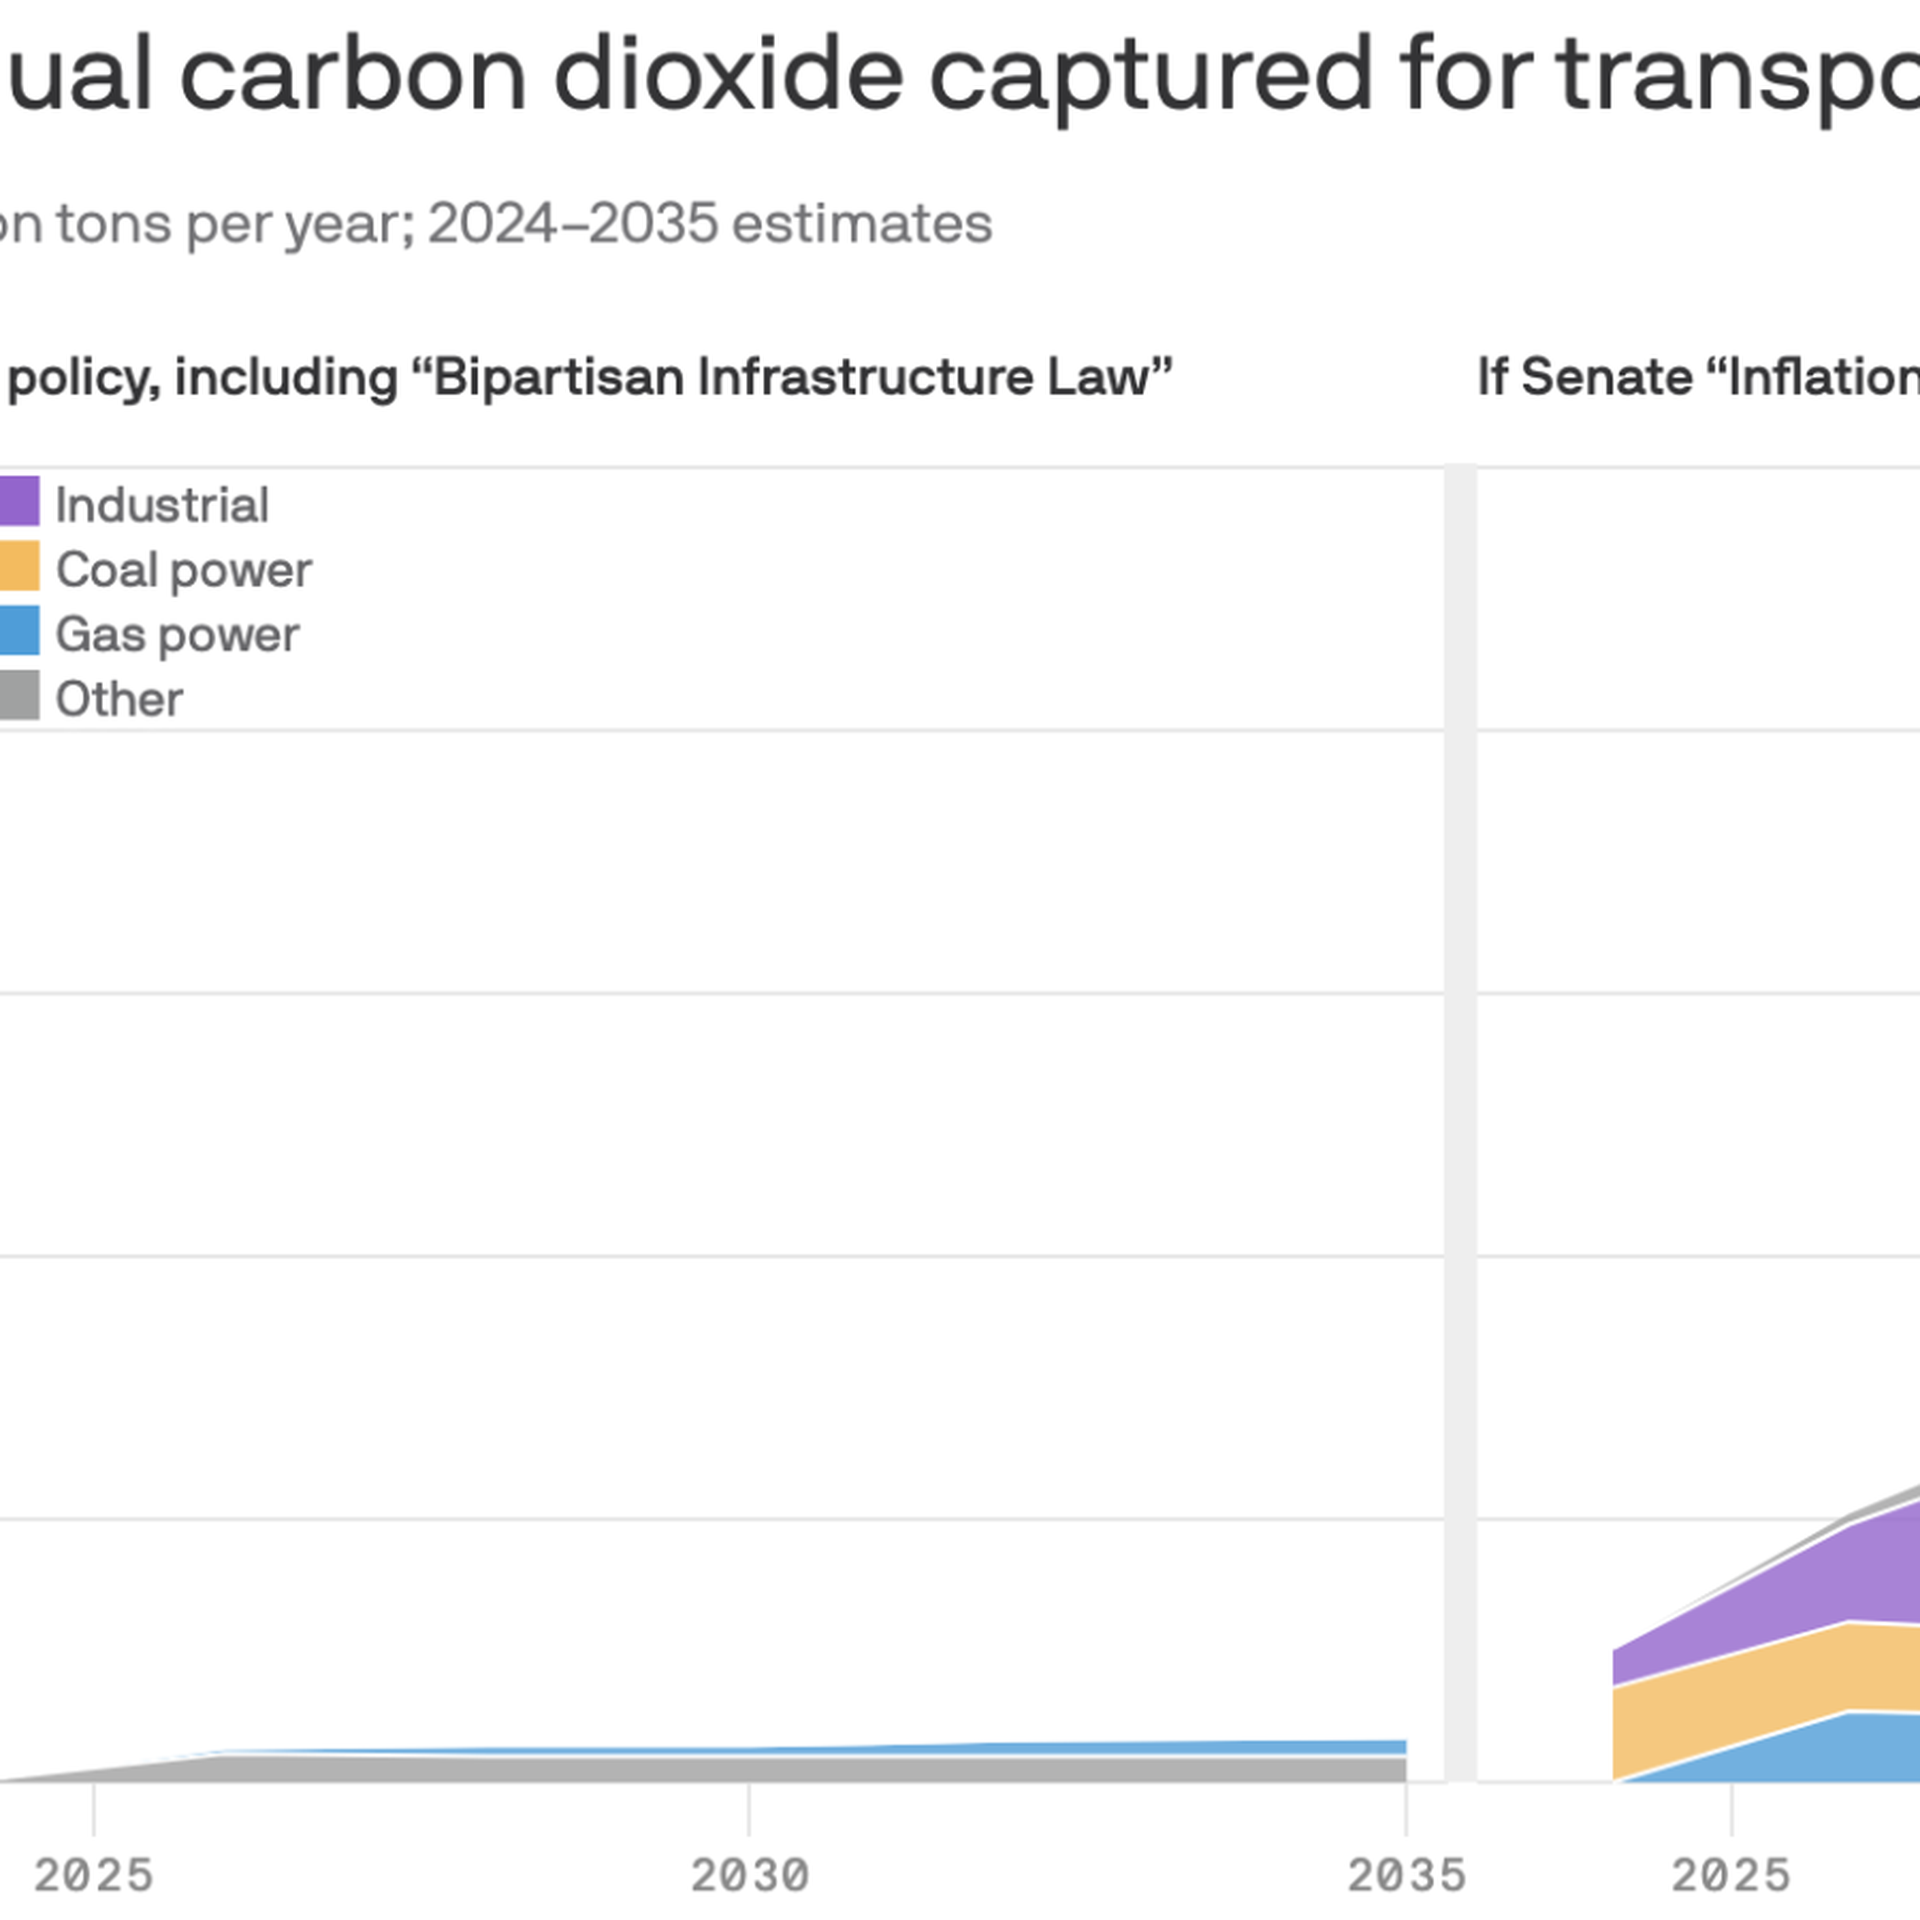 Annual carbon dioxide captured for transport and geologic storage